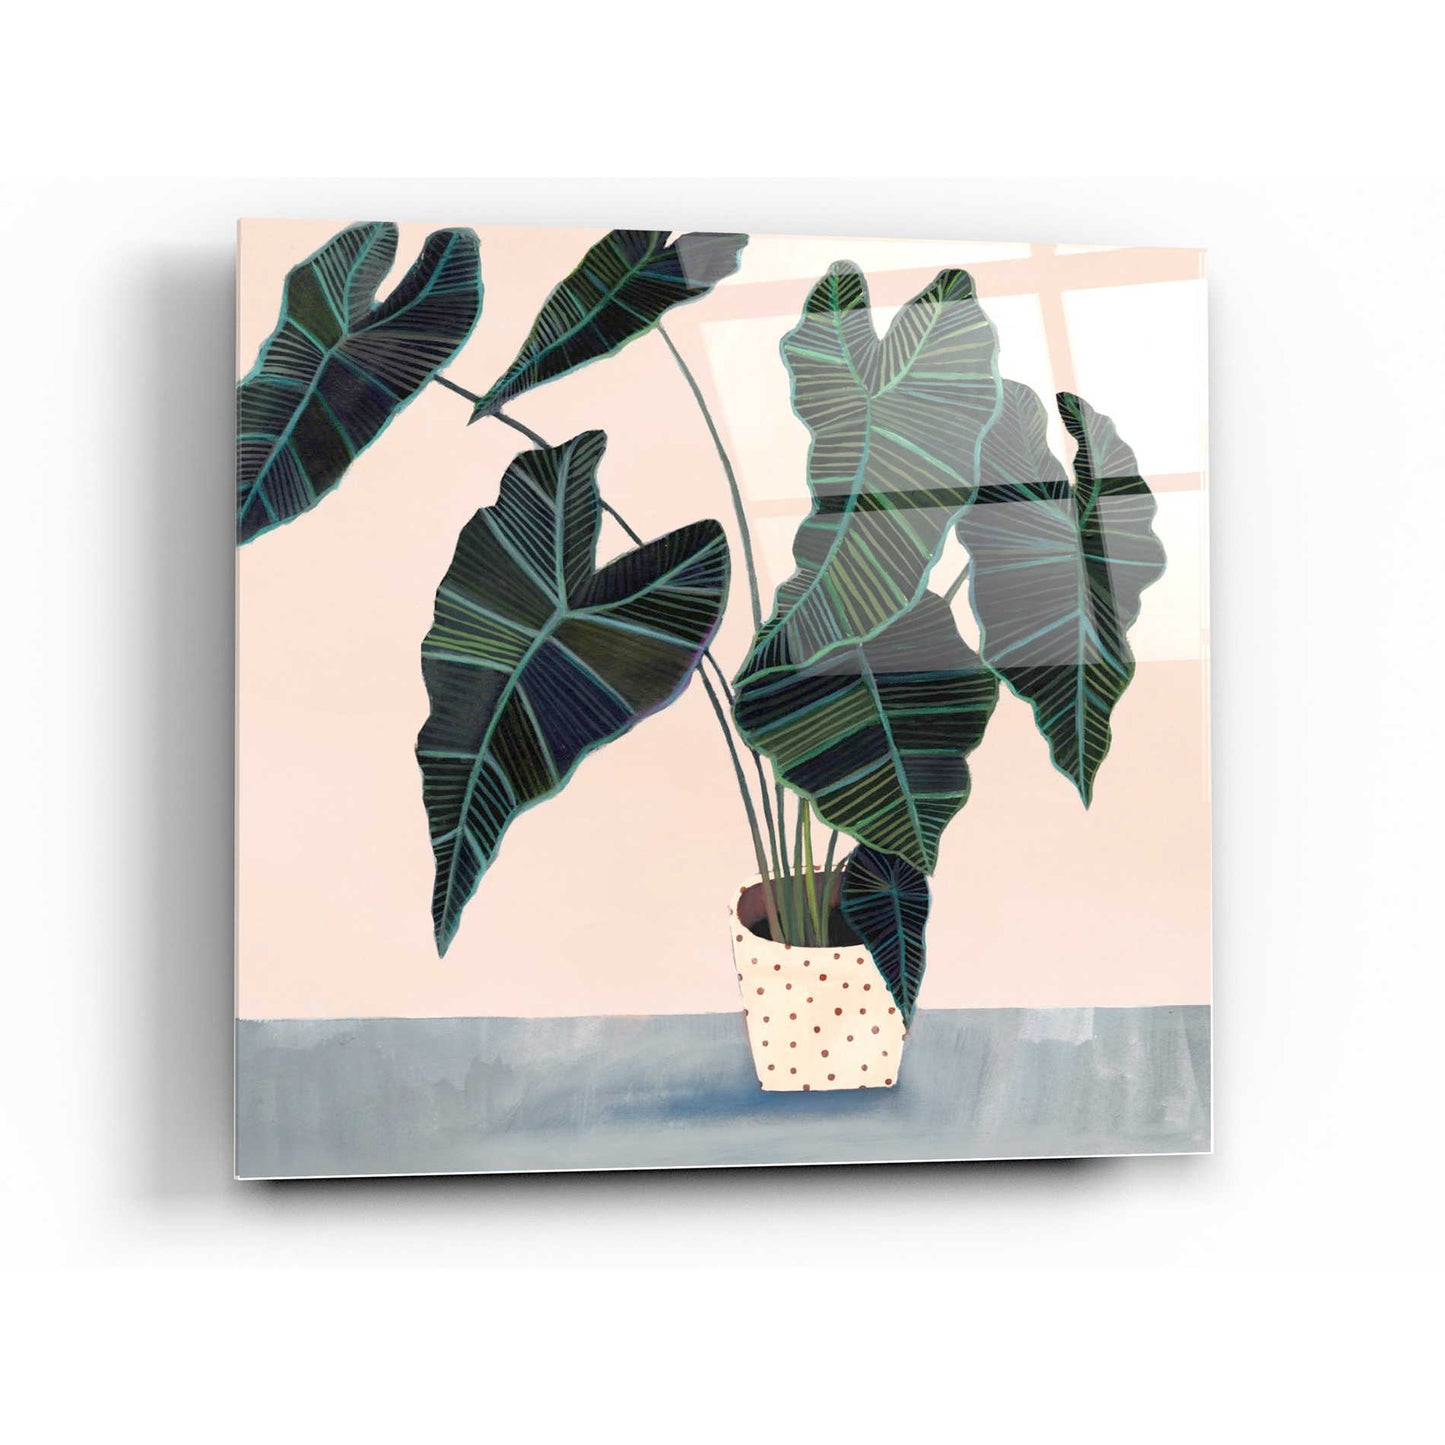 Epic Art 'Houseplant II' by Victoria Borges Acrylic Glass Wall Art